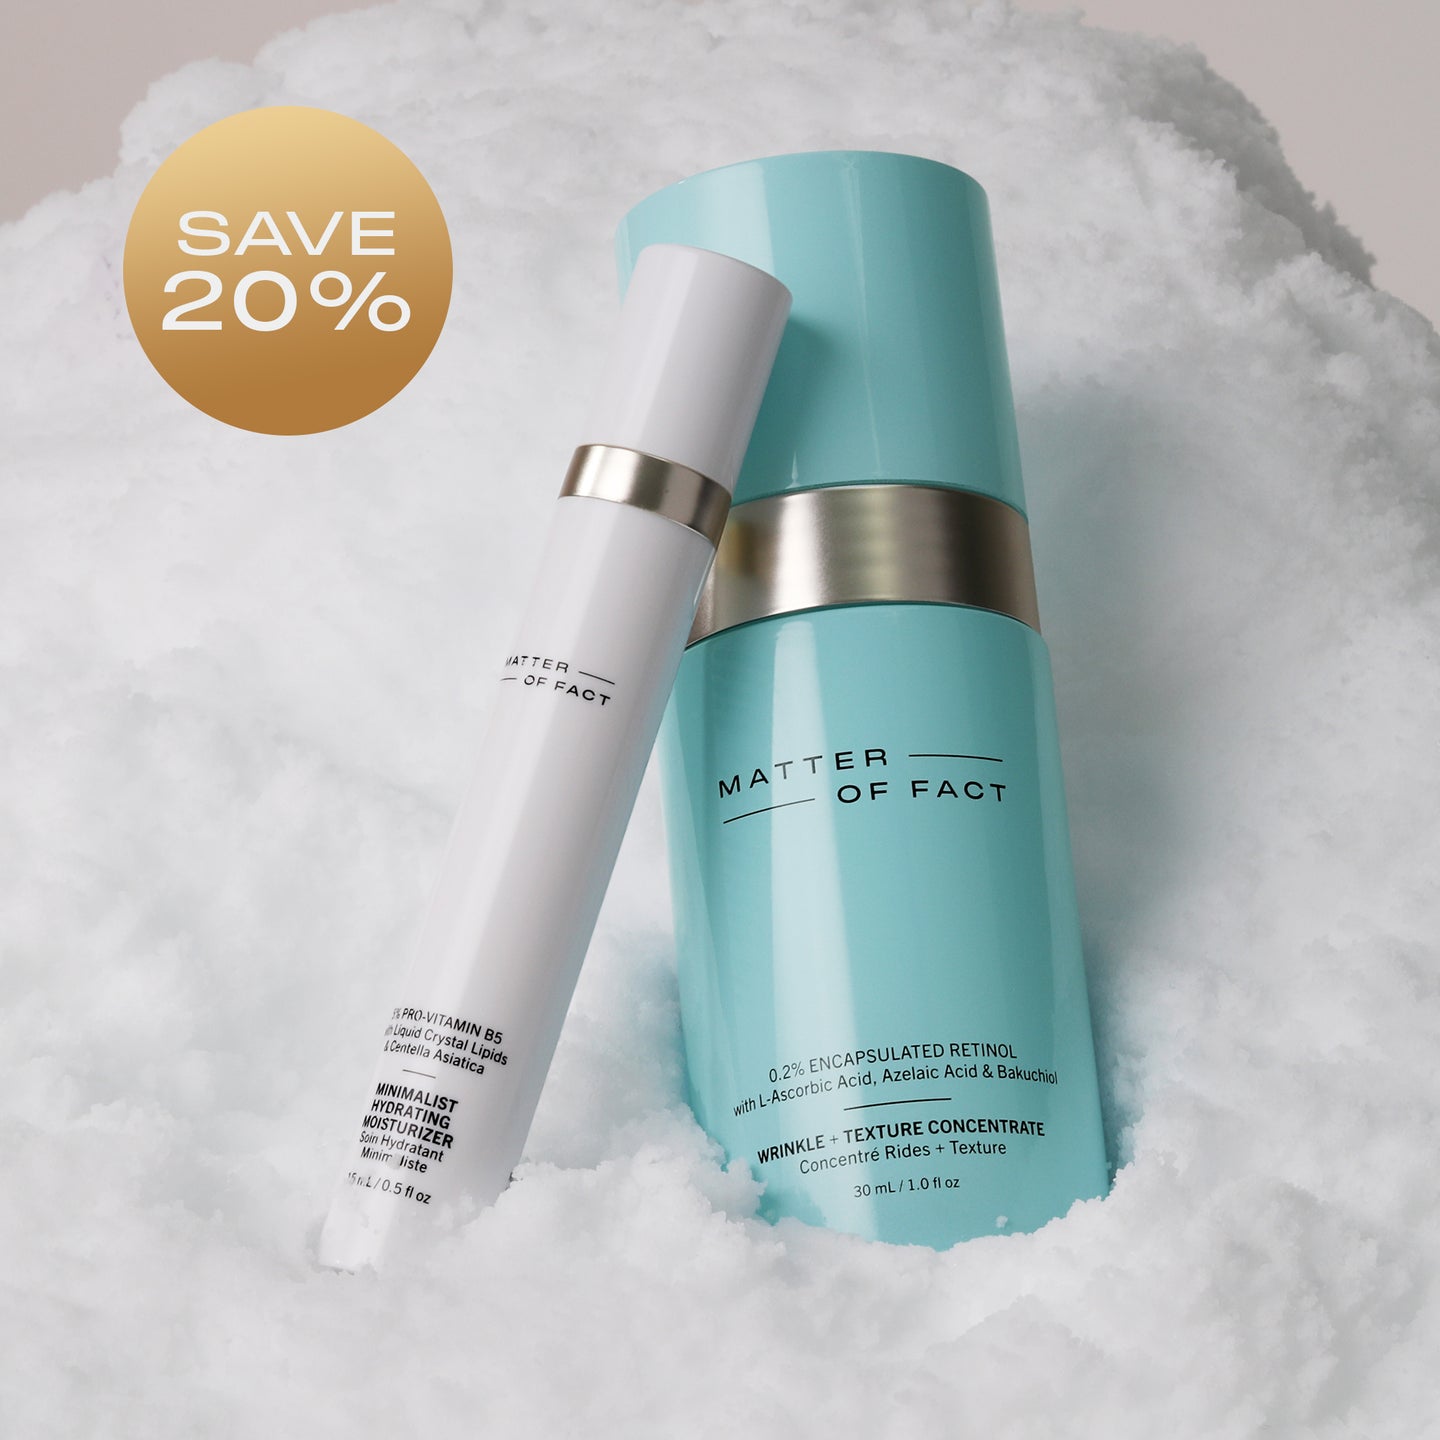 WRINKLE + TEXTURE CONCENTRATE and MINIMALIST HYDRATING MOISTURIZER on snow showing percent savings for the duo